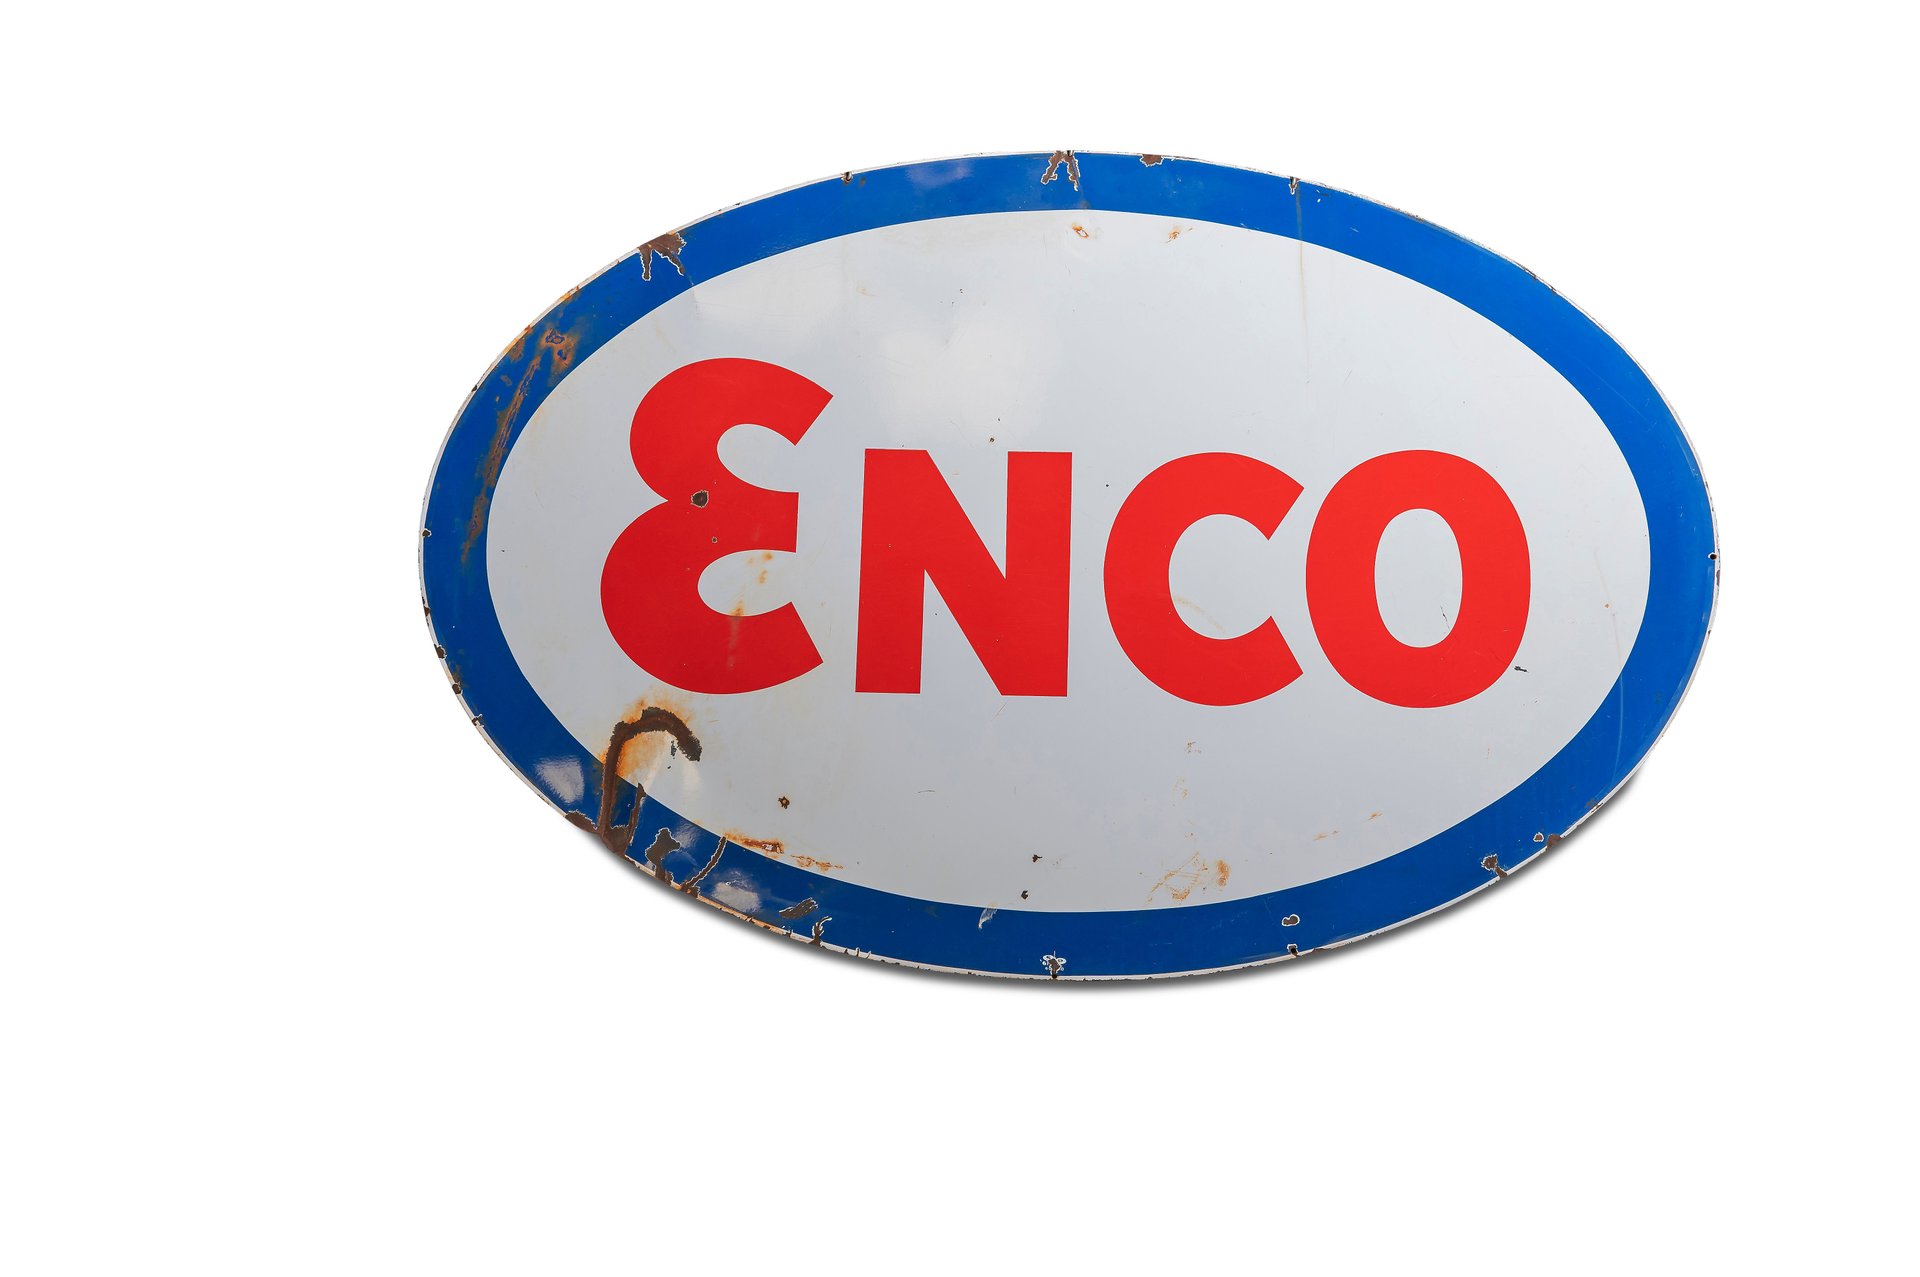 Broad Arrow Auctions | Large 'Enco' Porcelain Sign, Double-Sided